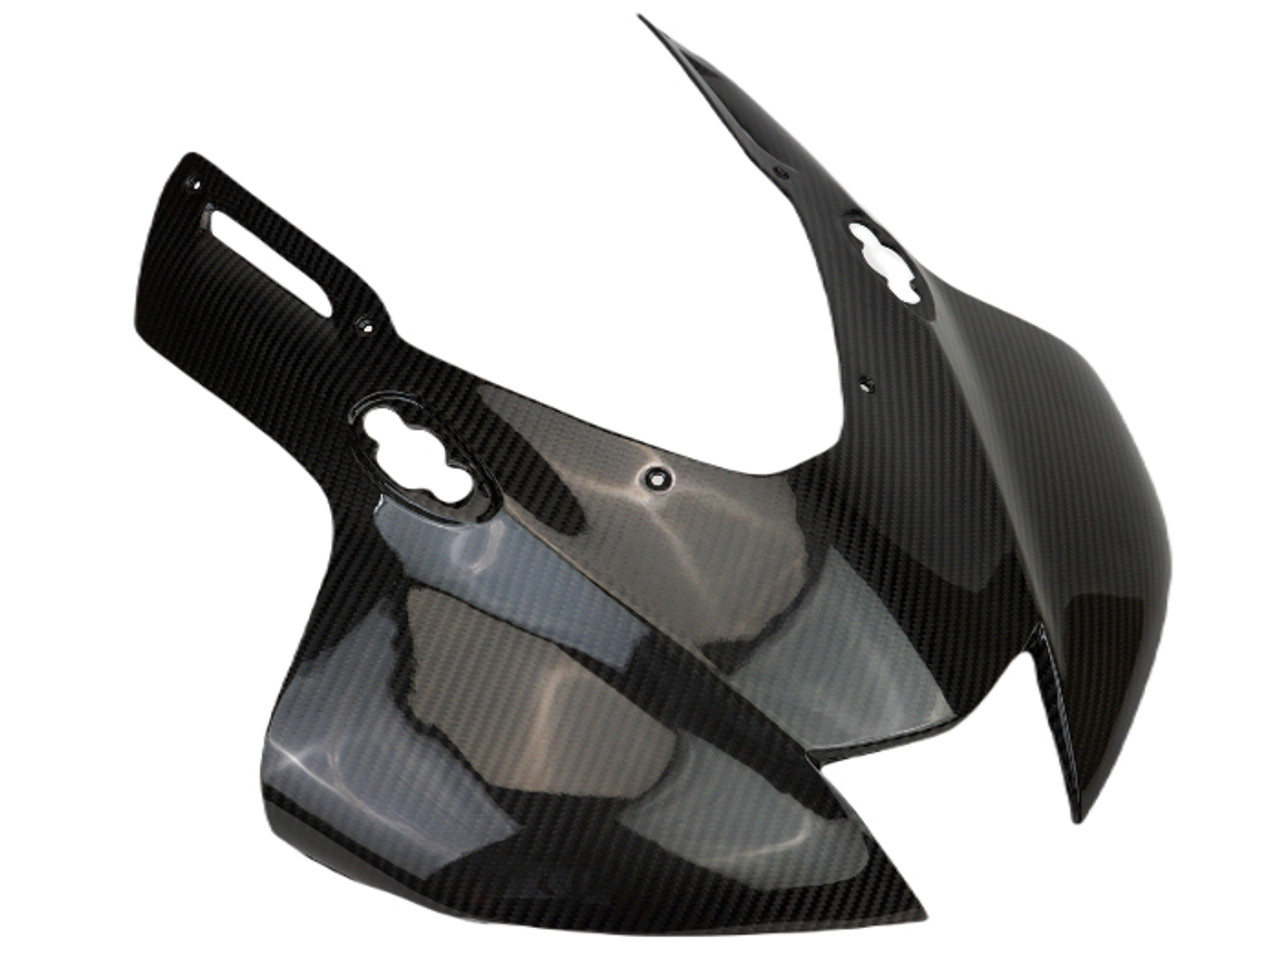 Upper Front Fairing in Glossy Twill Weave Carbon Fiber for Honda CBR1000RR-R and SP 2020+

